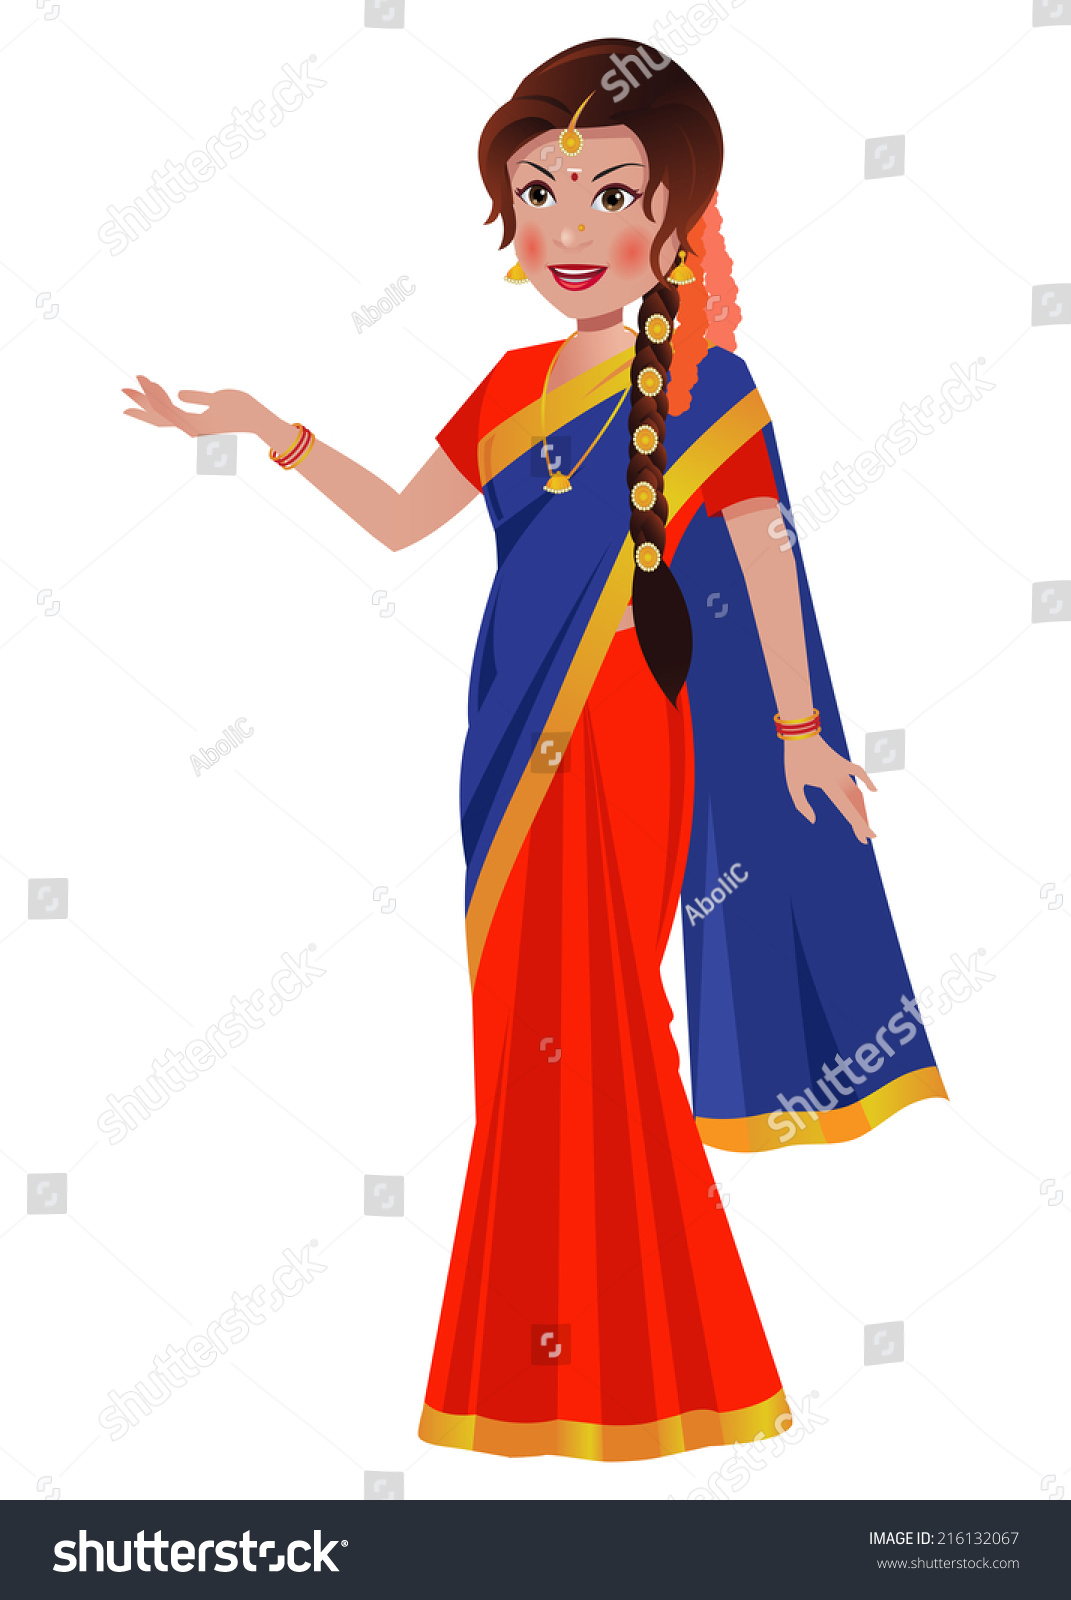 South Asian Indian Woman Standing Traditional Stock Vector 216132067 ...